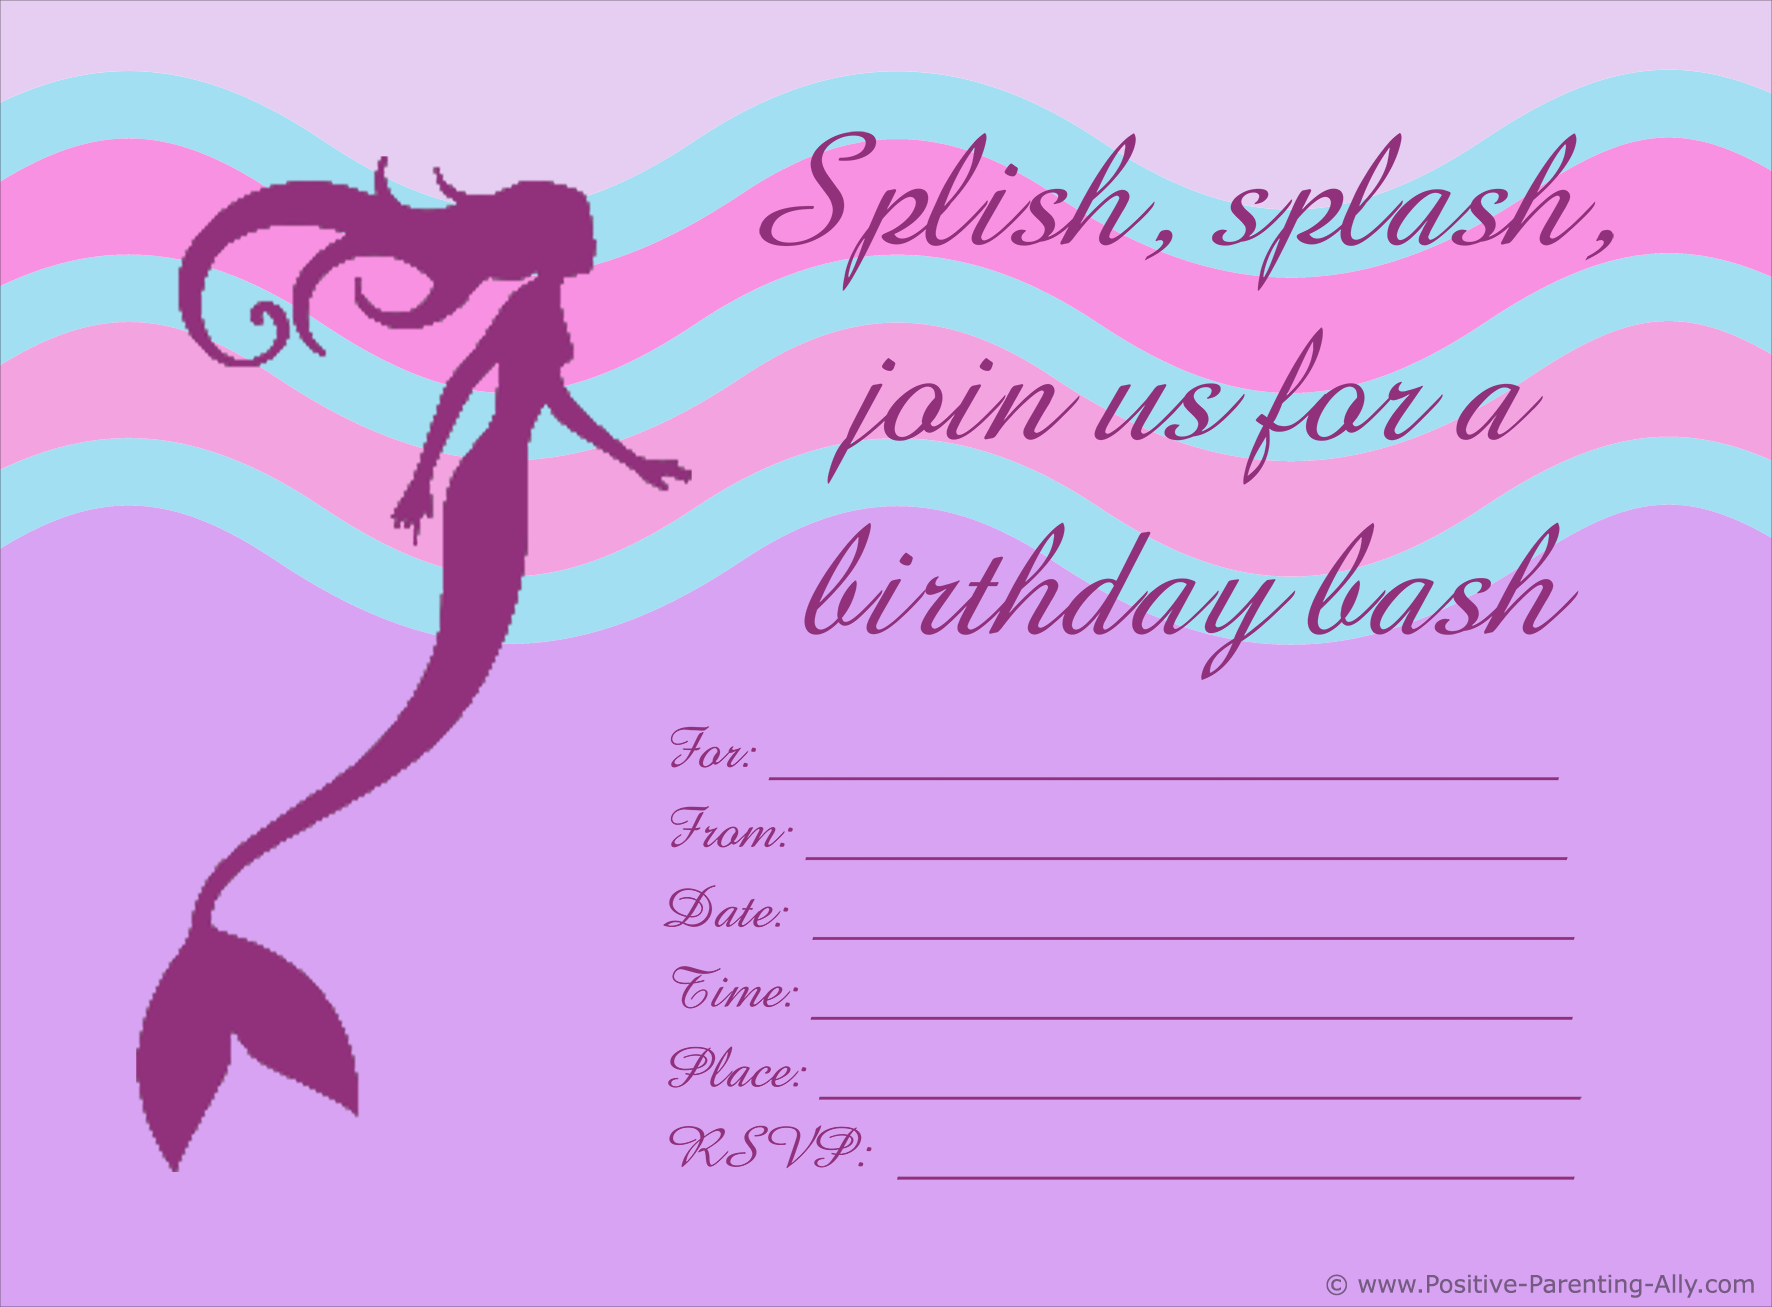 Free Birthday Party Invites For Kids In High Print Quality